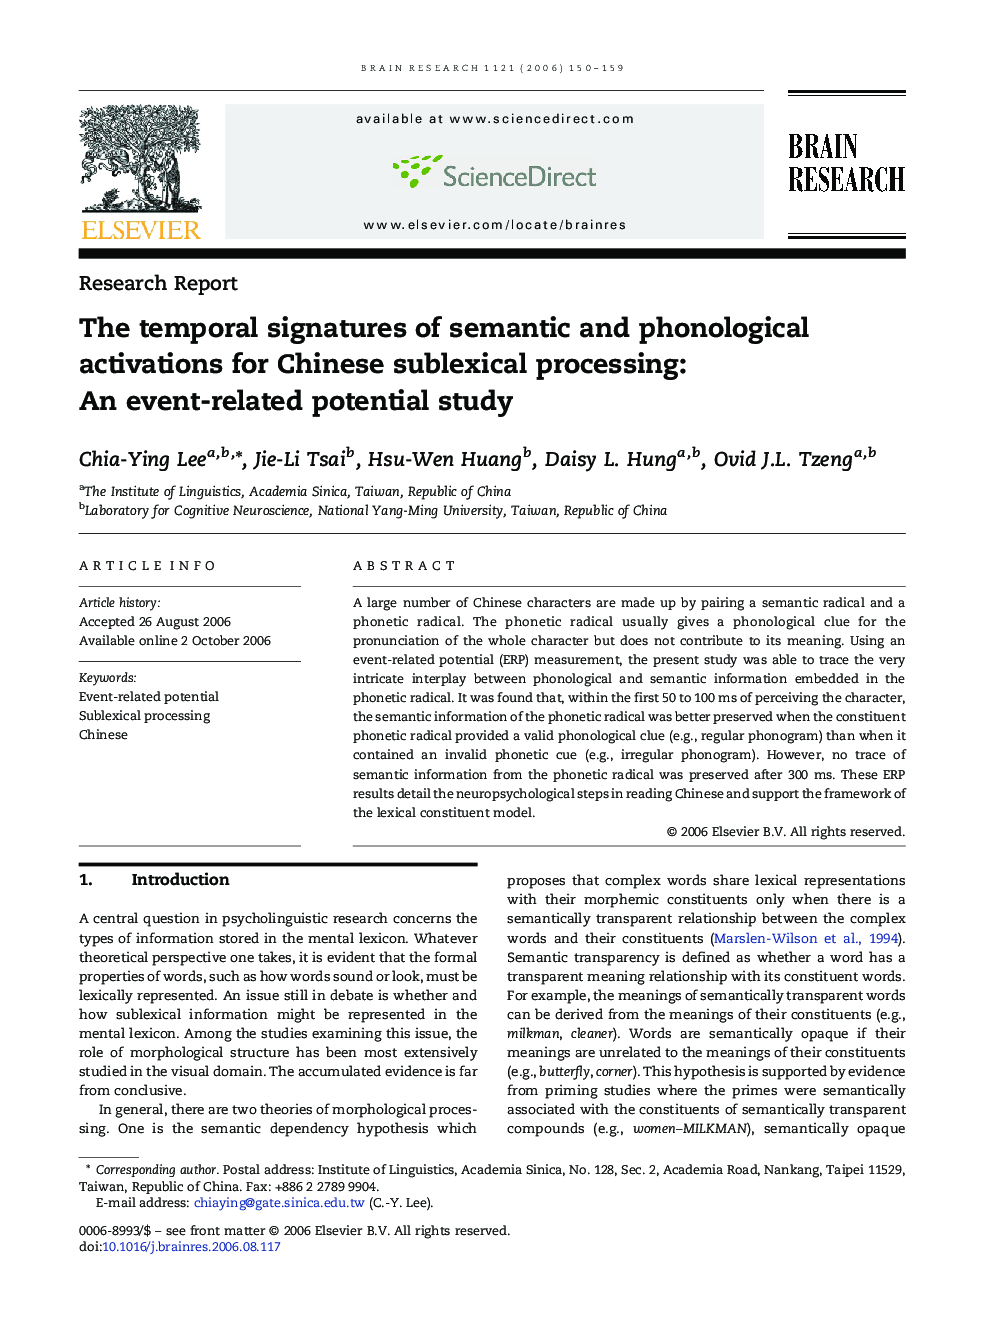 The temporal signatures of semantic and phonological activations for Chinese sublexical processing: An event-related potential study